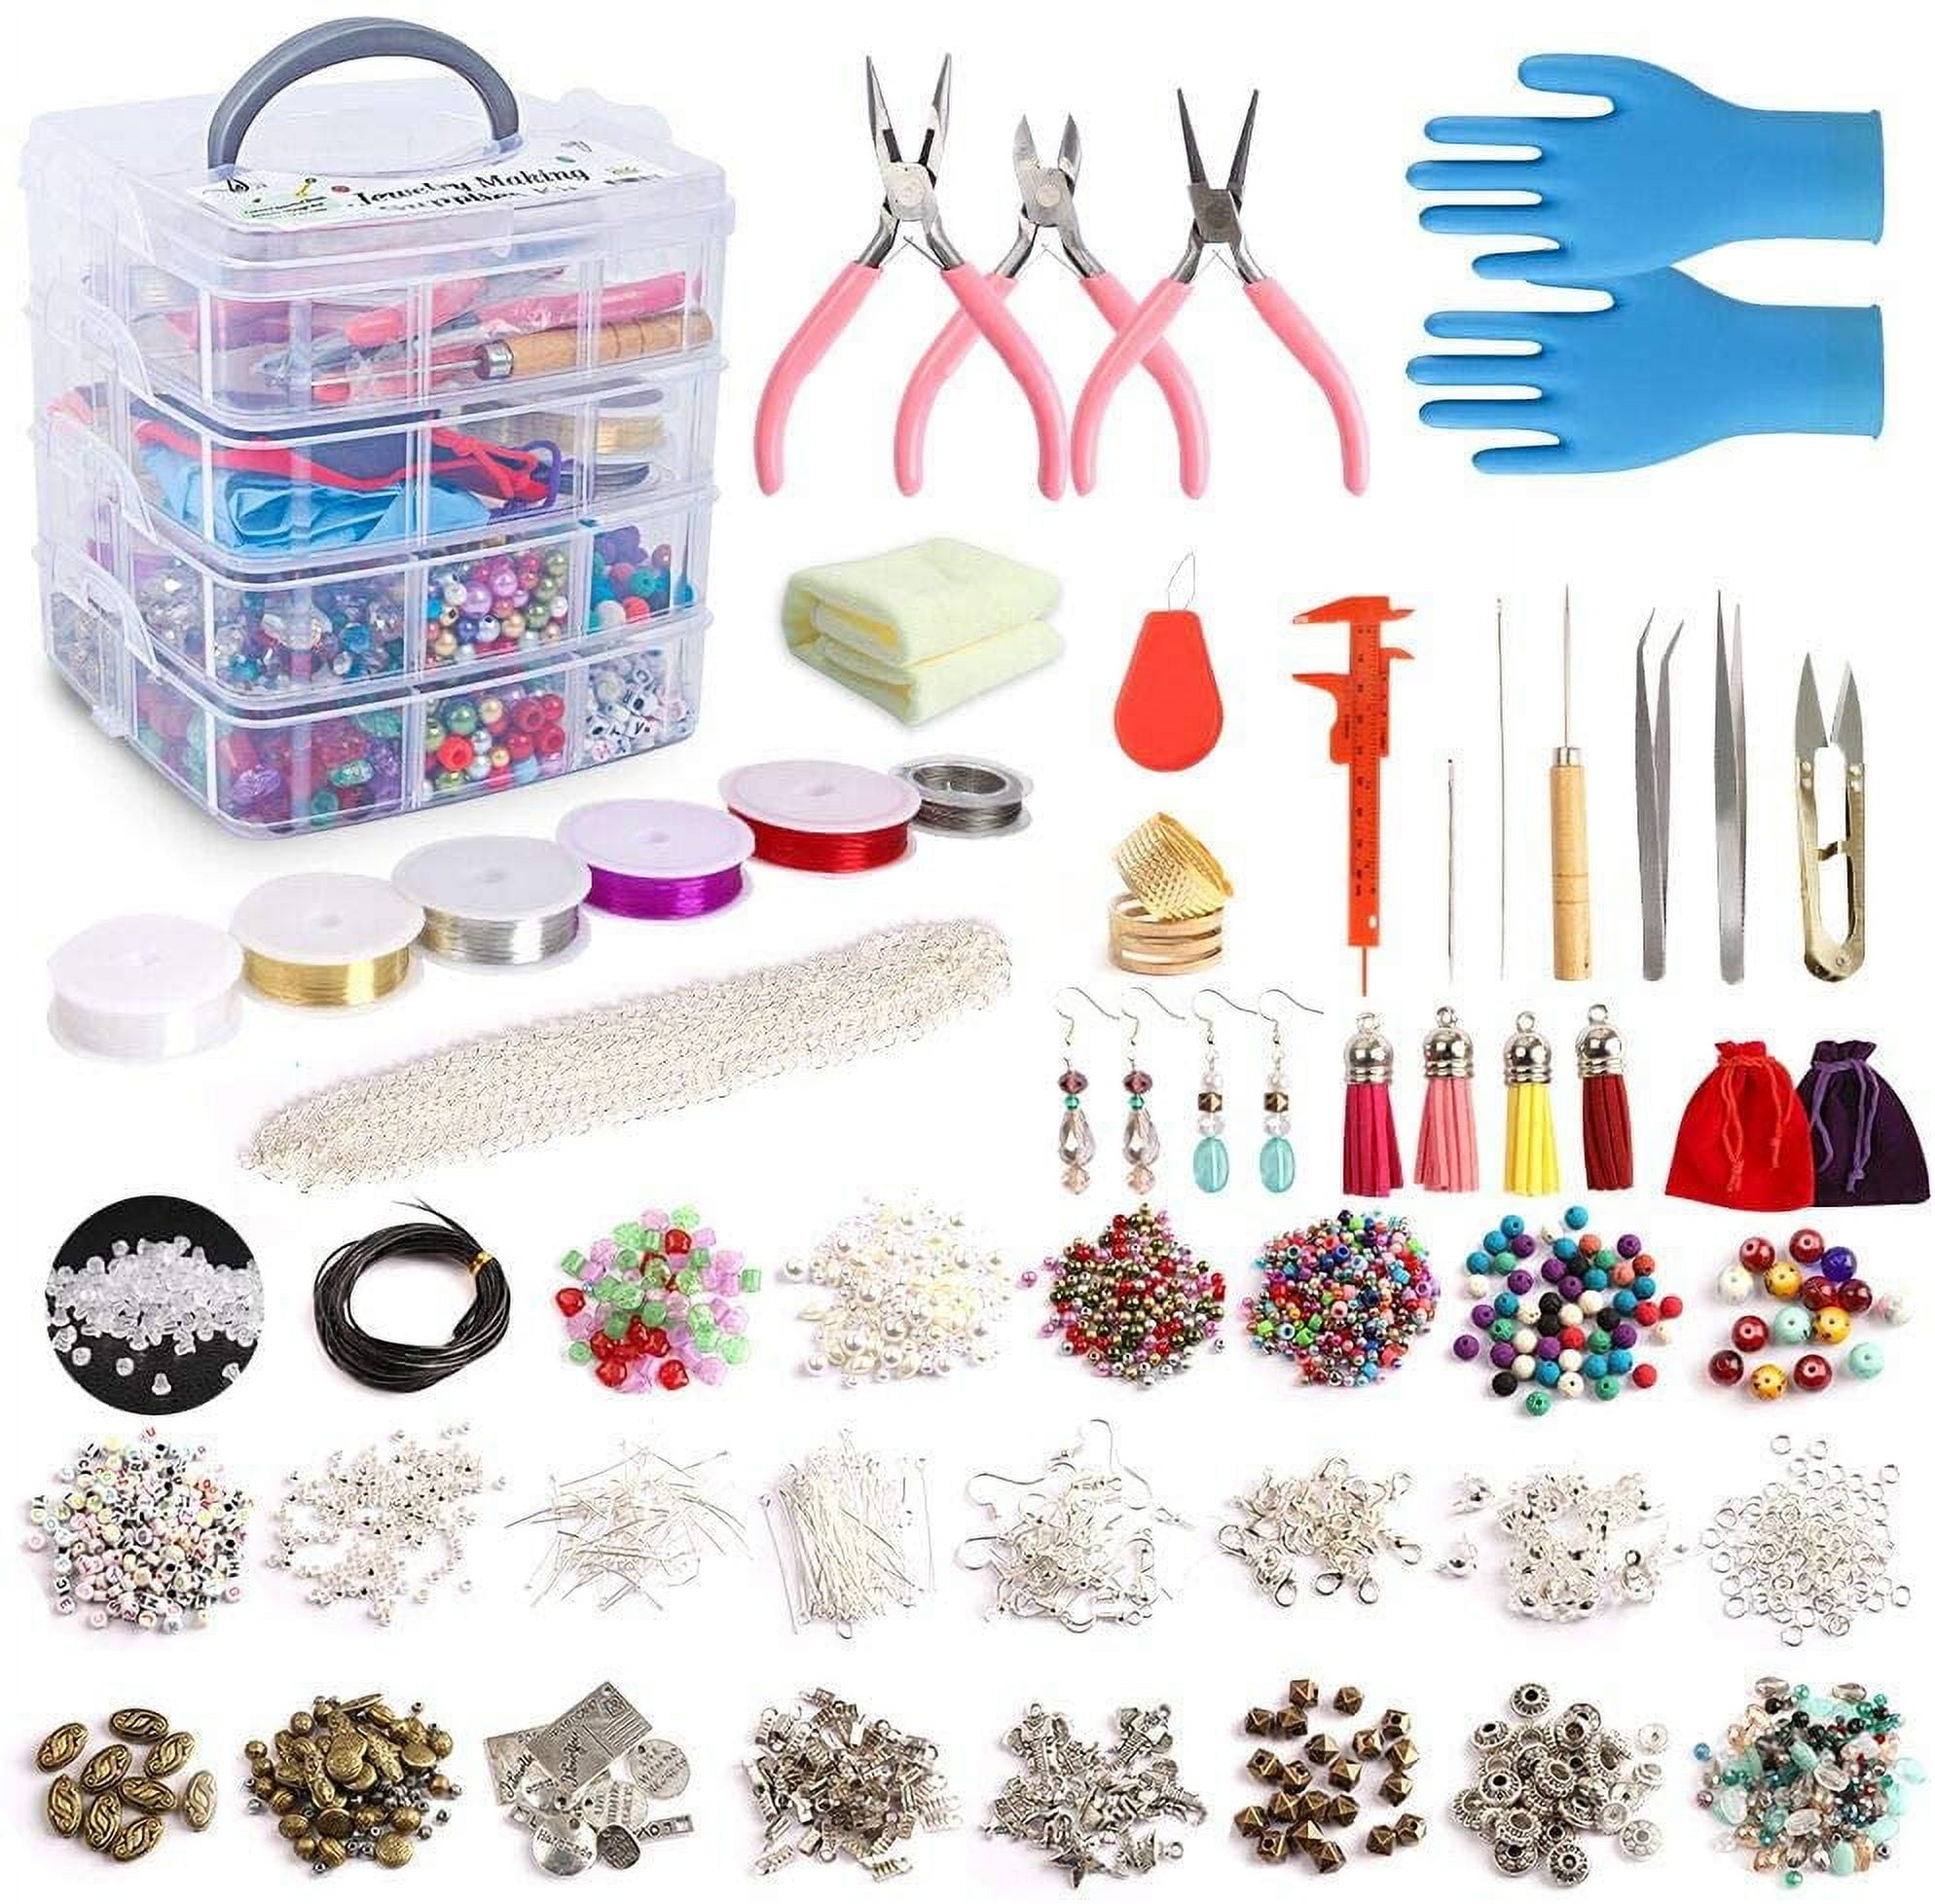 Inscraft Jewelry Making Kit, 1960 Pcs Jewelry Making Supplies Includes Jewelry Beads, Instructions, Findings, Wire for Bracelet, Necklace, Earrings Making Kit